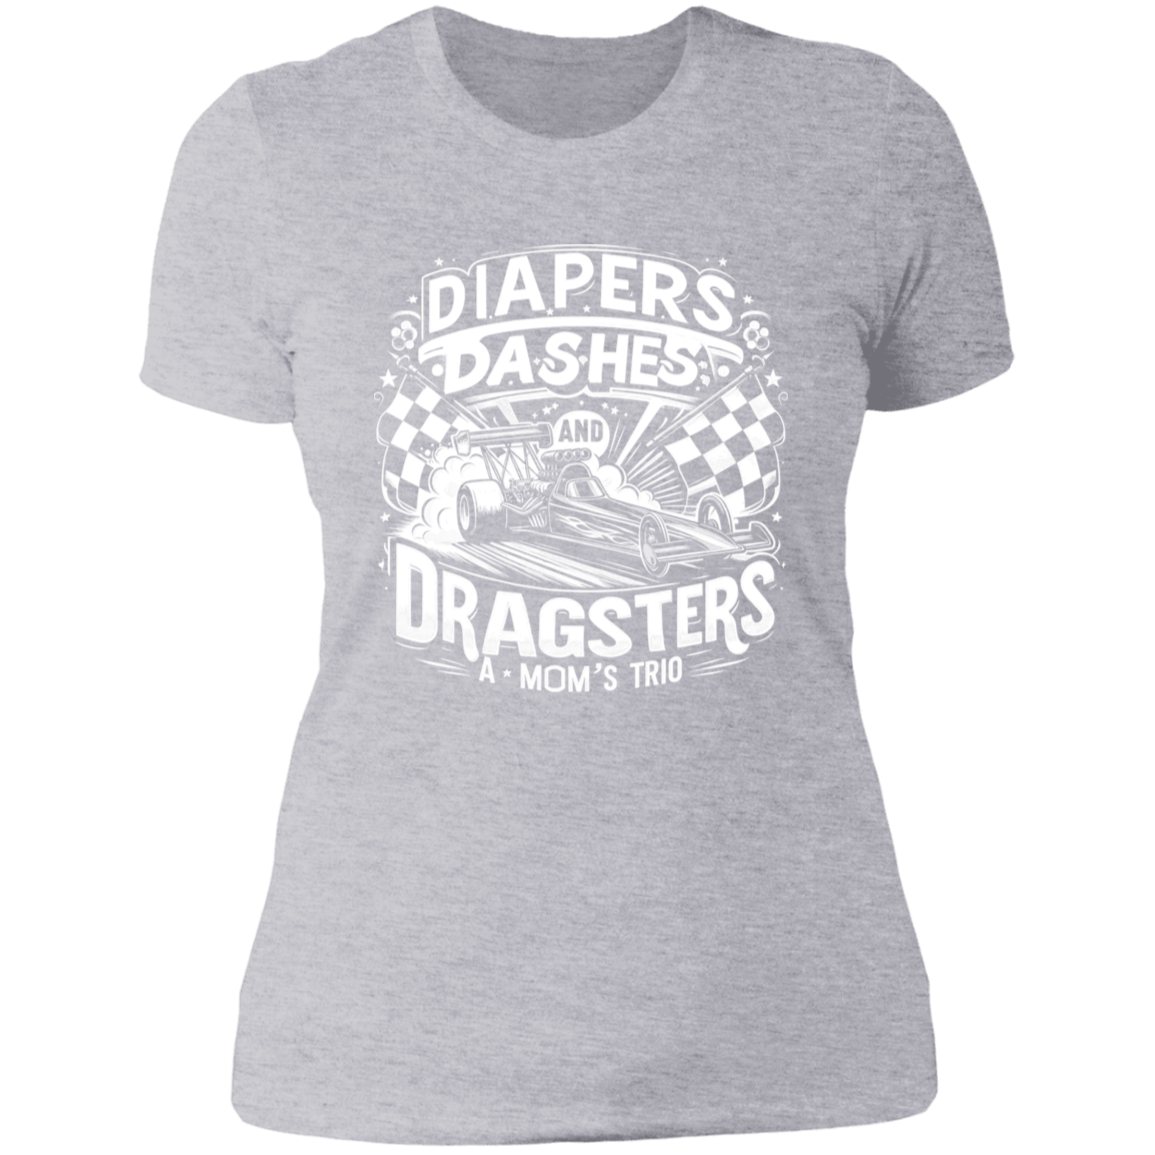 Diapers Dashes And Dragsters A Mom's Trio T-Shirts V1